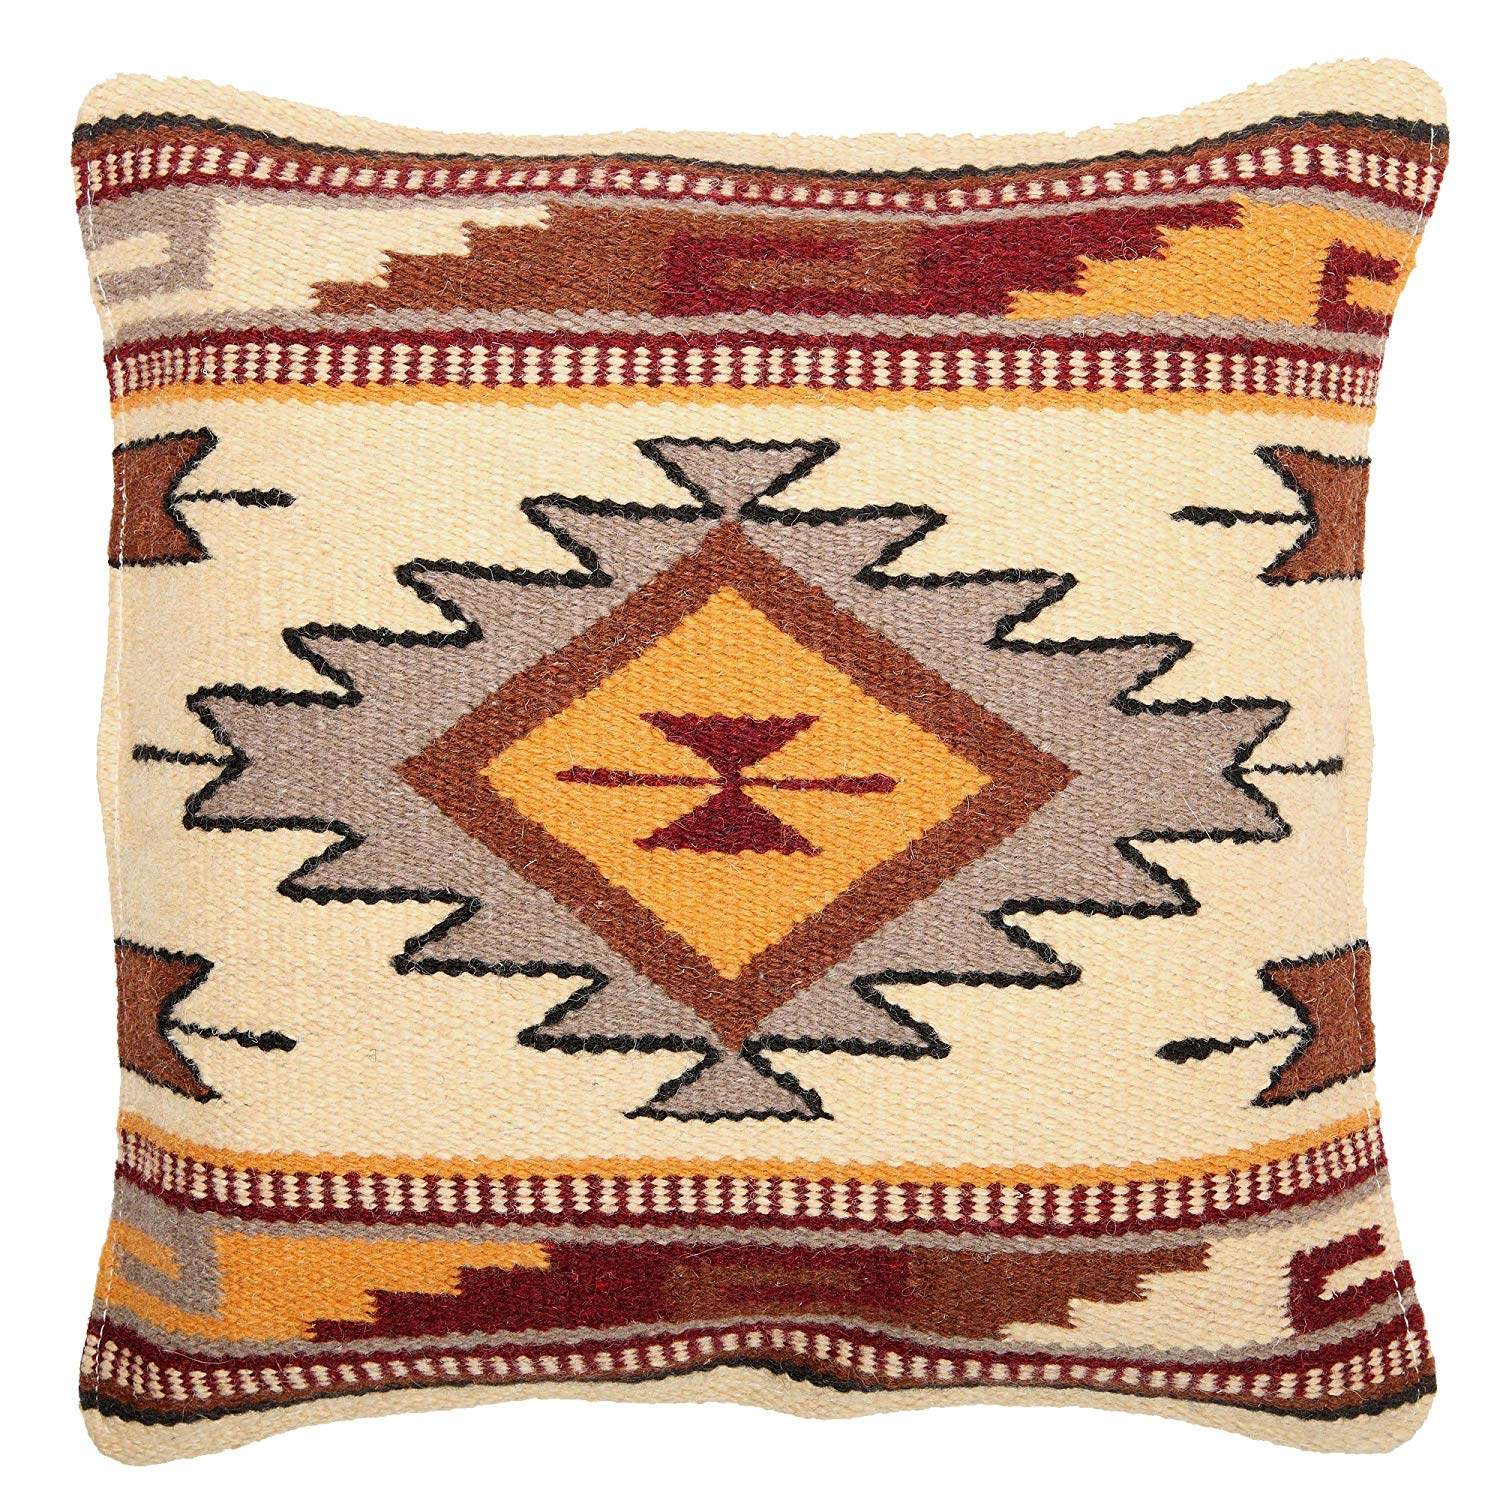 Native American Embroidery Patterns Cheap Hand Embroidery Designs For Pillow Covers Find Hand